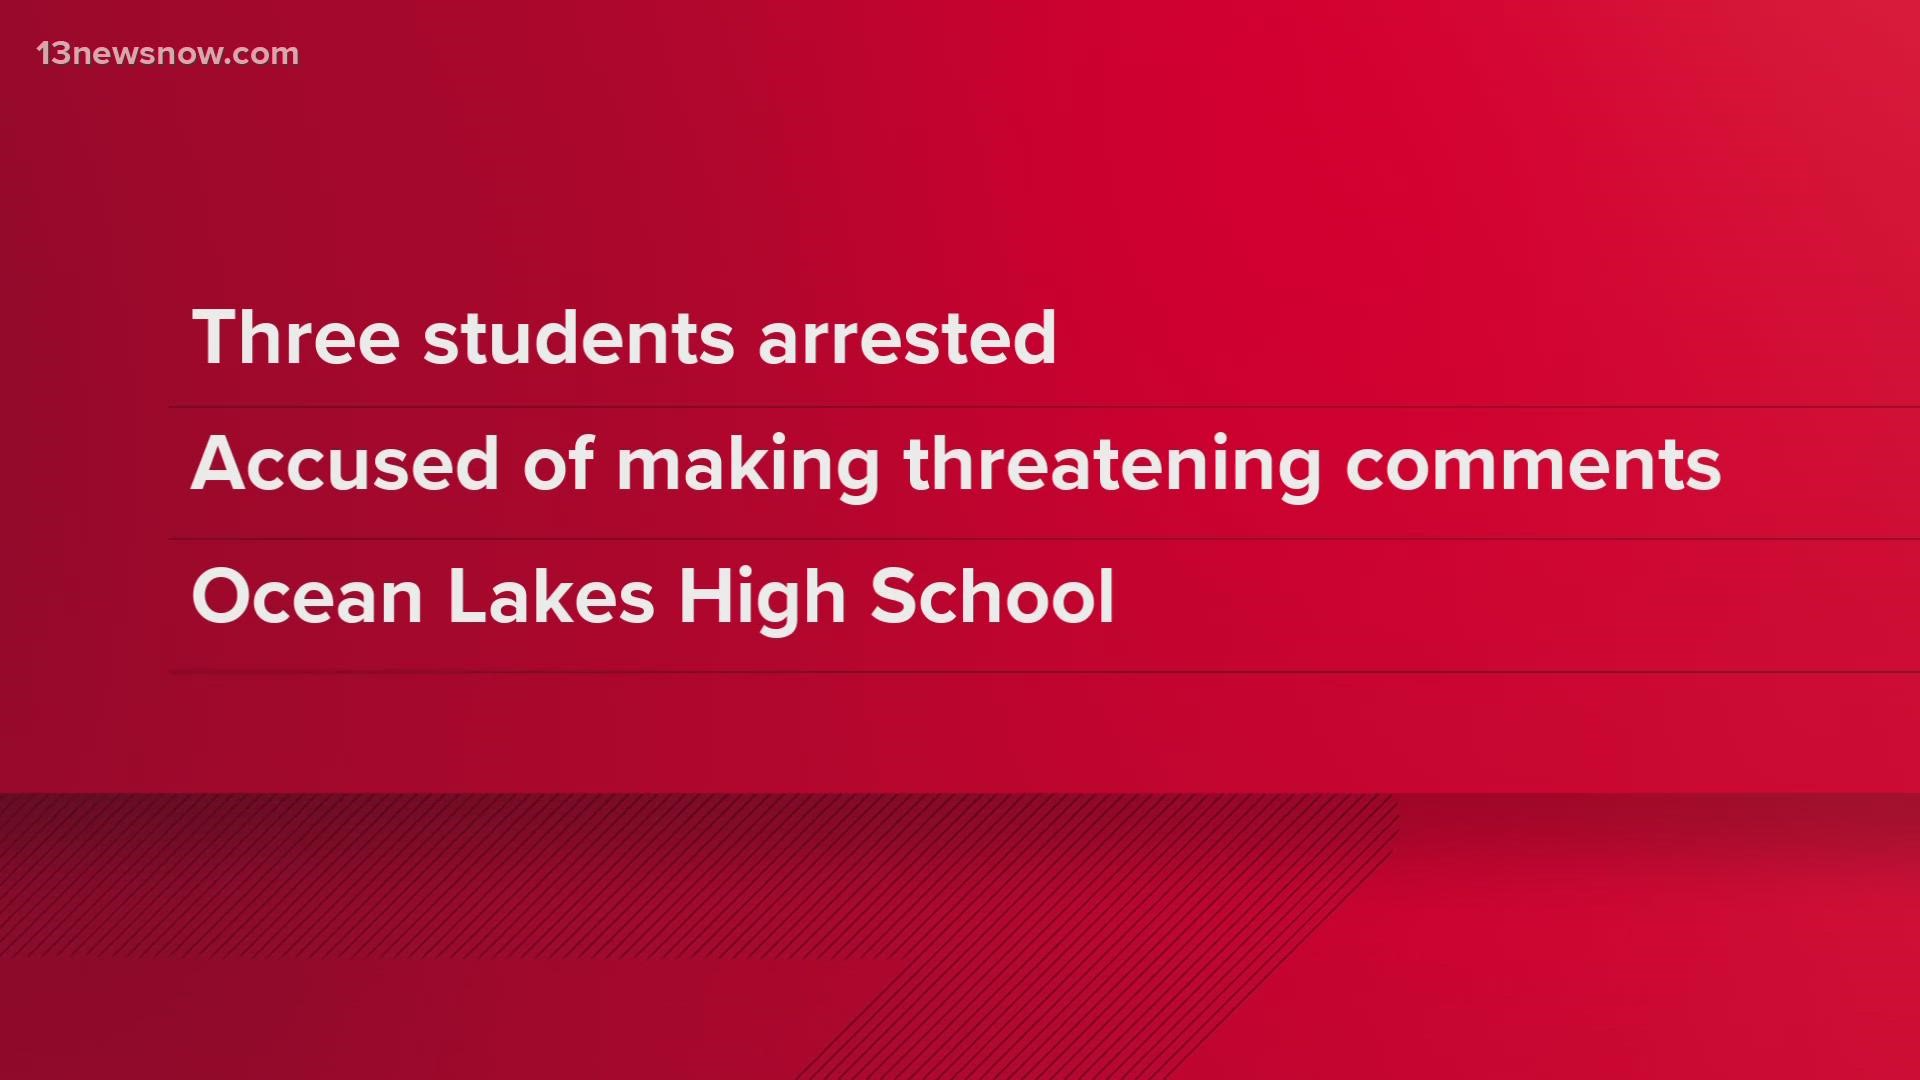 Three students at Ocean Lakes High School were arrested for making threatening comments online about a teacher, the Virginia Beach Police Department (VBPD) said.